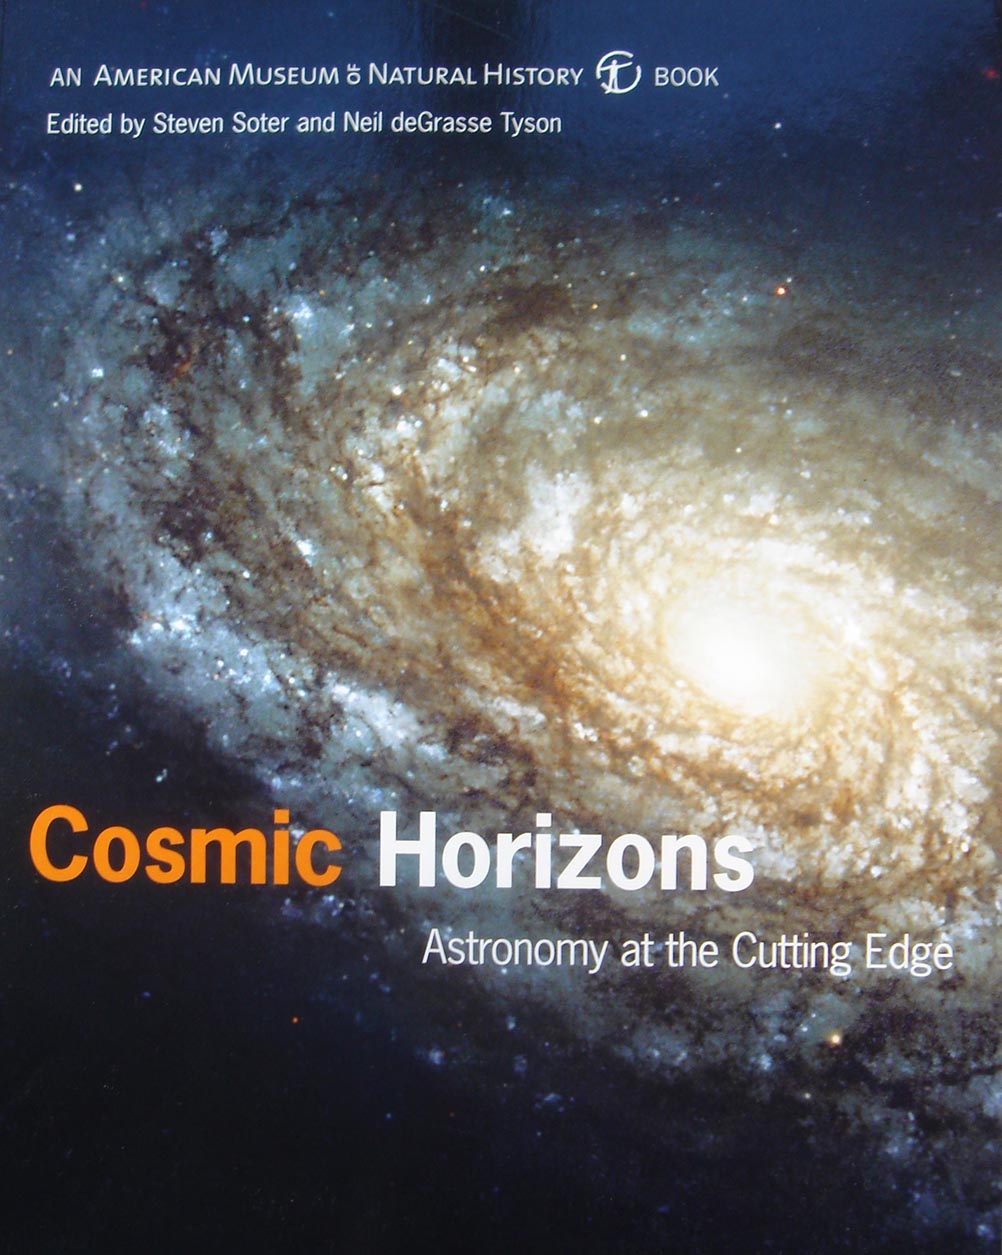 Link to the book Cosmic Horizons edited by Steven Soter and Neil deGrasse Tyson.